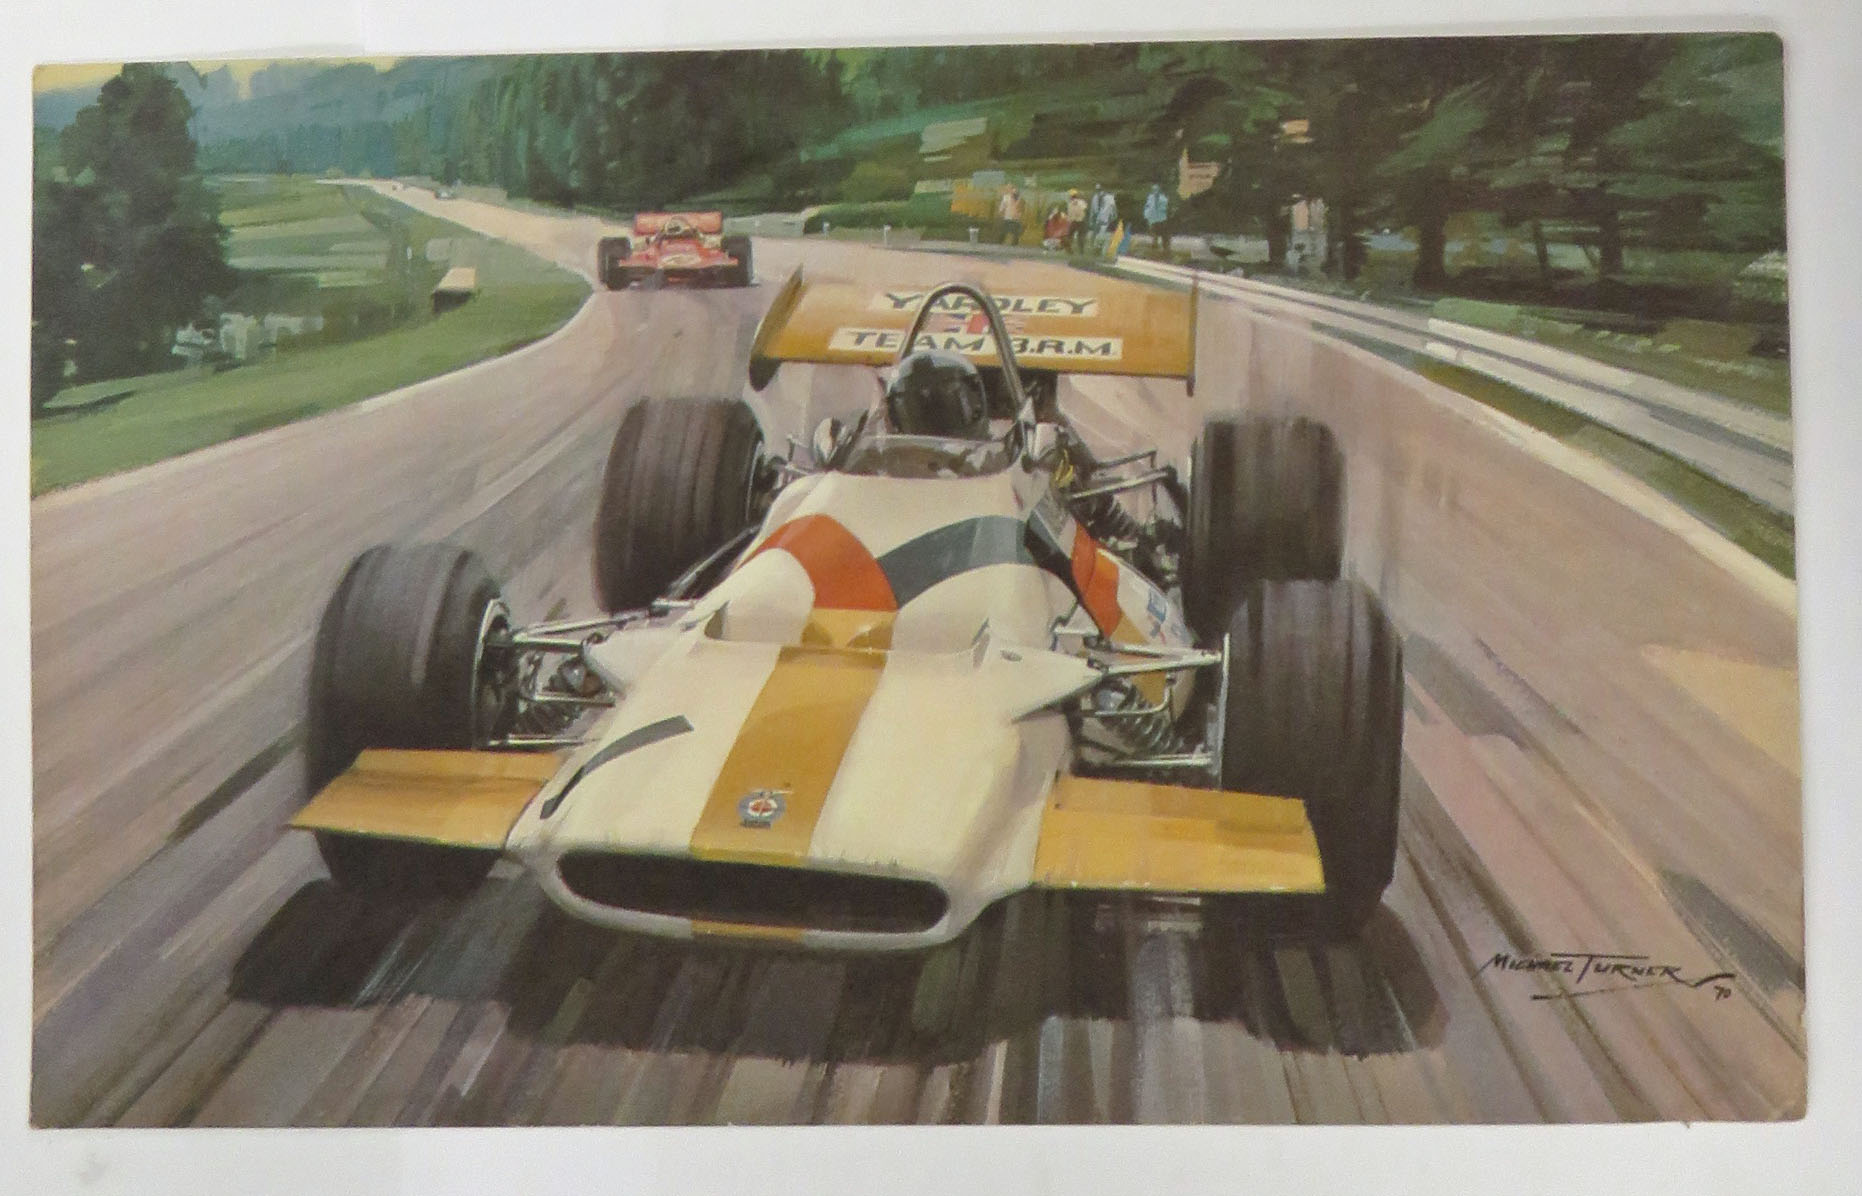 Postcard size colour reprint of Yardley Team BRM Driver Number 1 1970's by Motoring Artist Michael Turner 